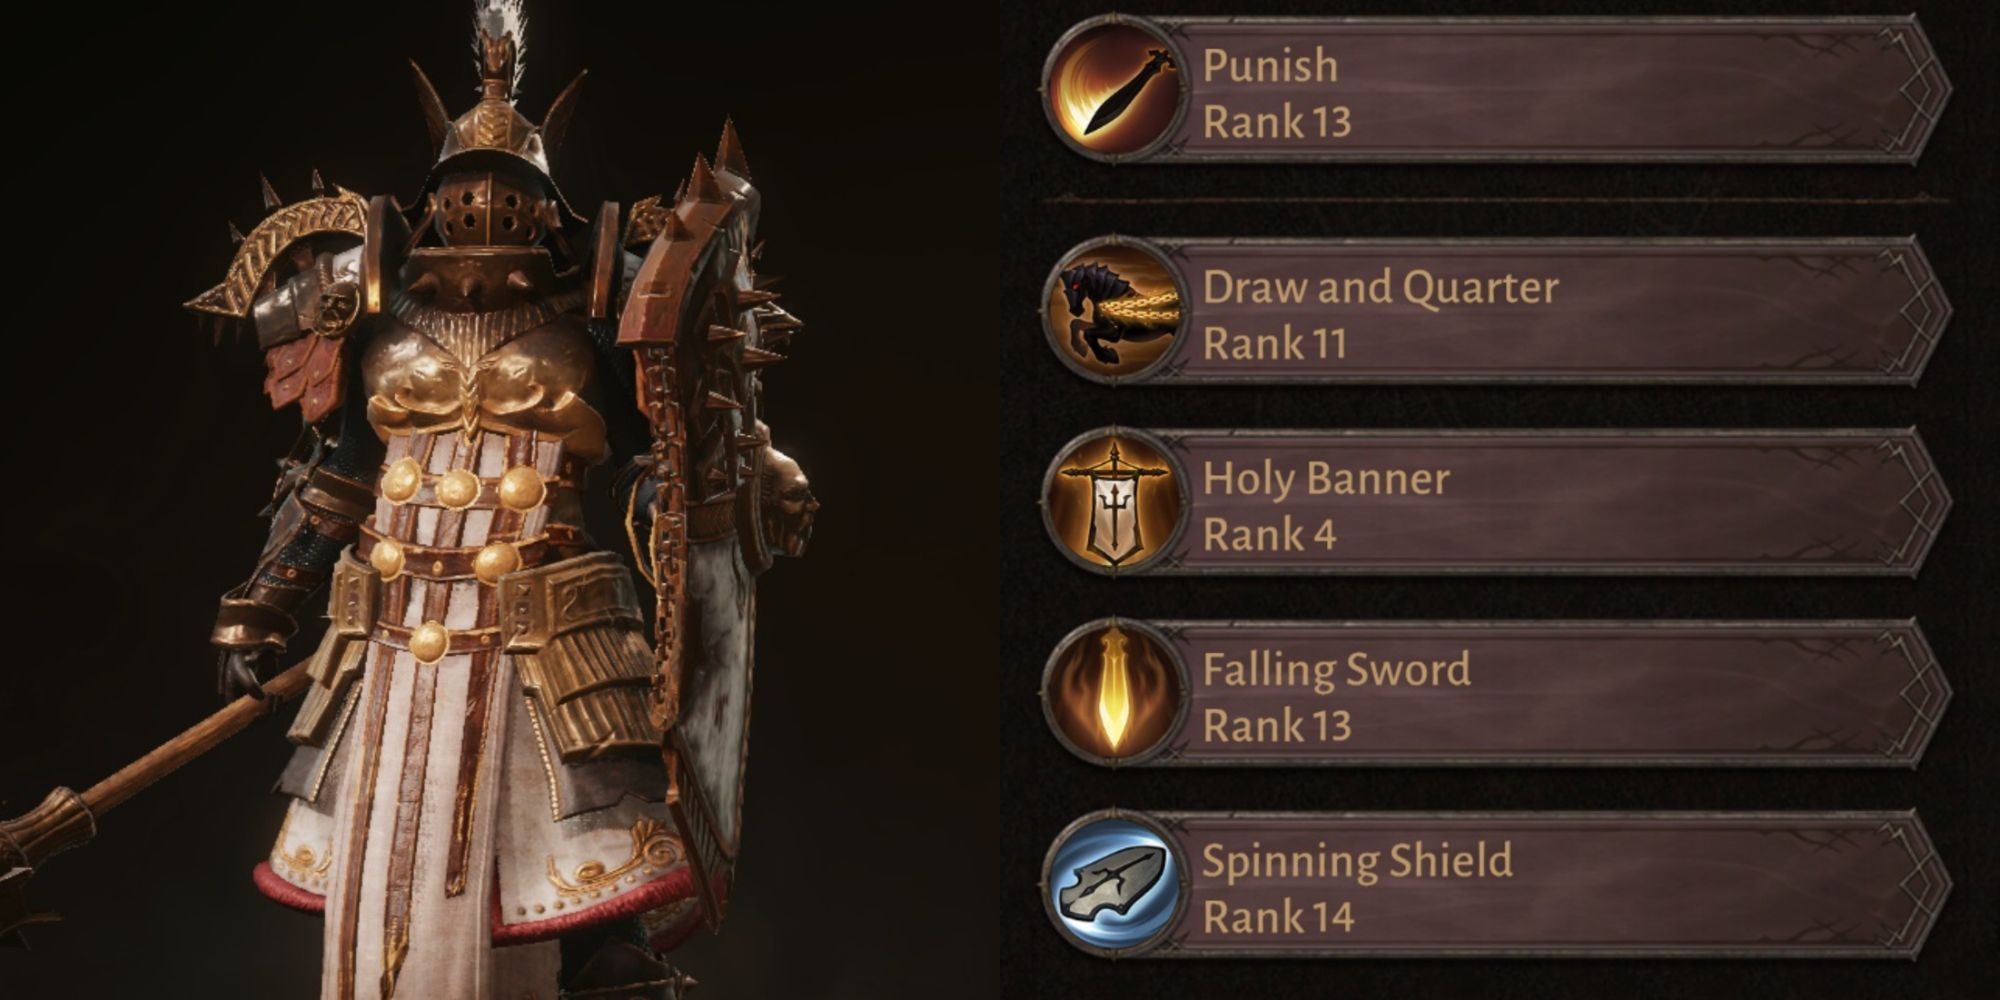 Crusader Holy Banner Raid Build Guide: Gems, Items, and How to